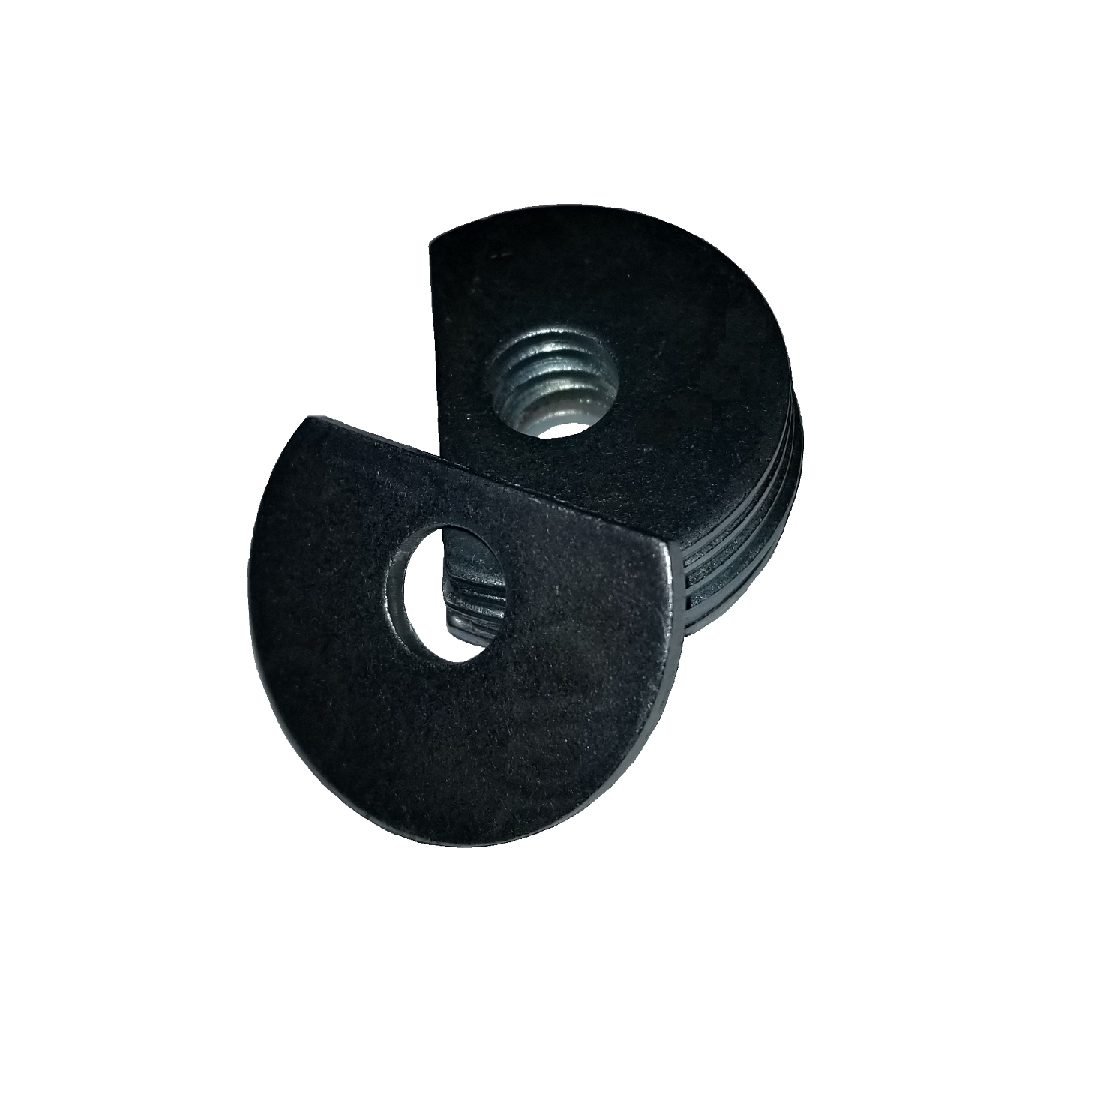 Clipped OD Washer - 1.656 ID, 3.000 OD, 0.156 Thick, Spring Steel - Hard